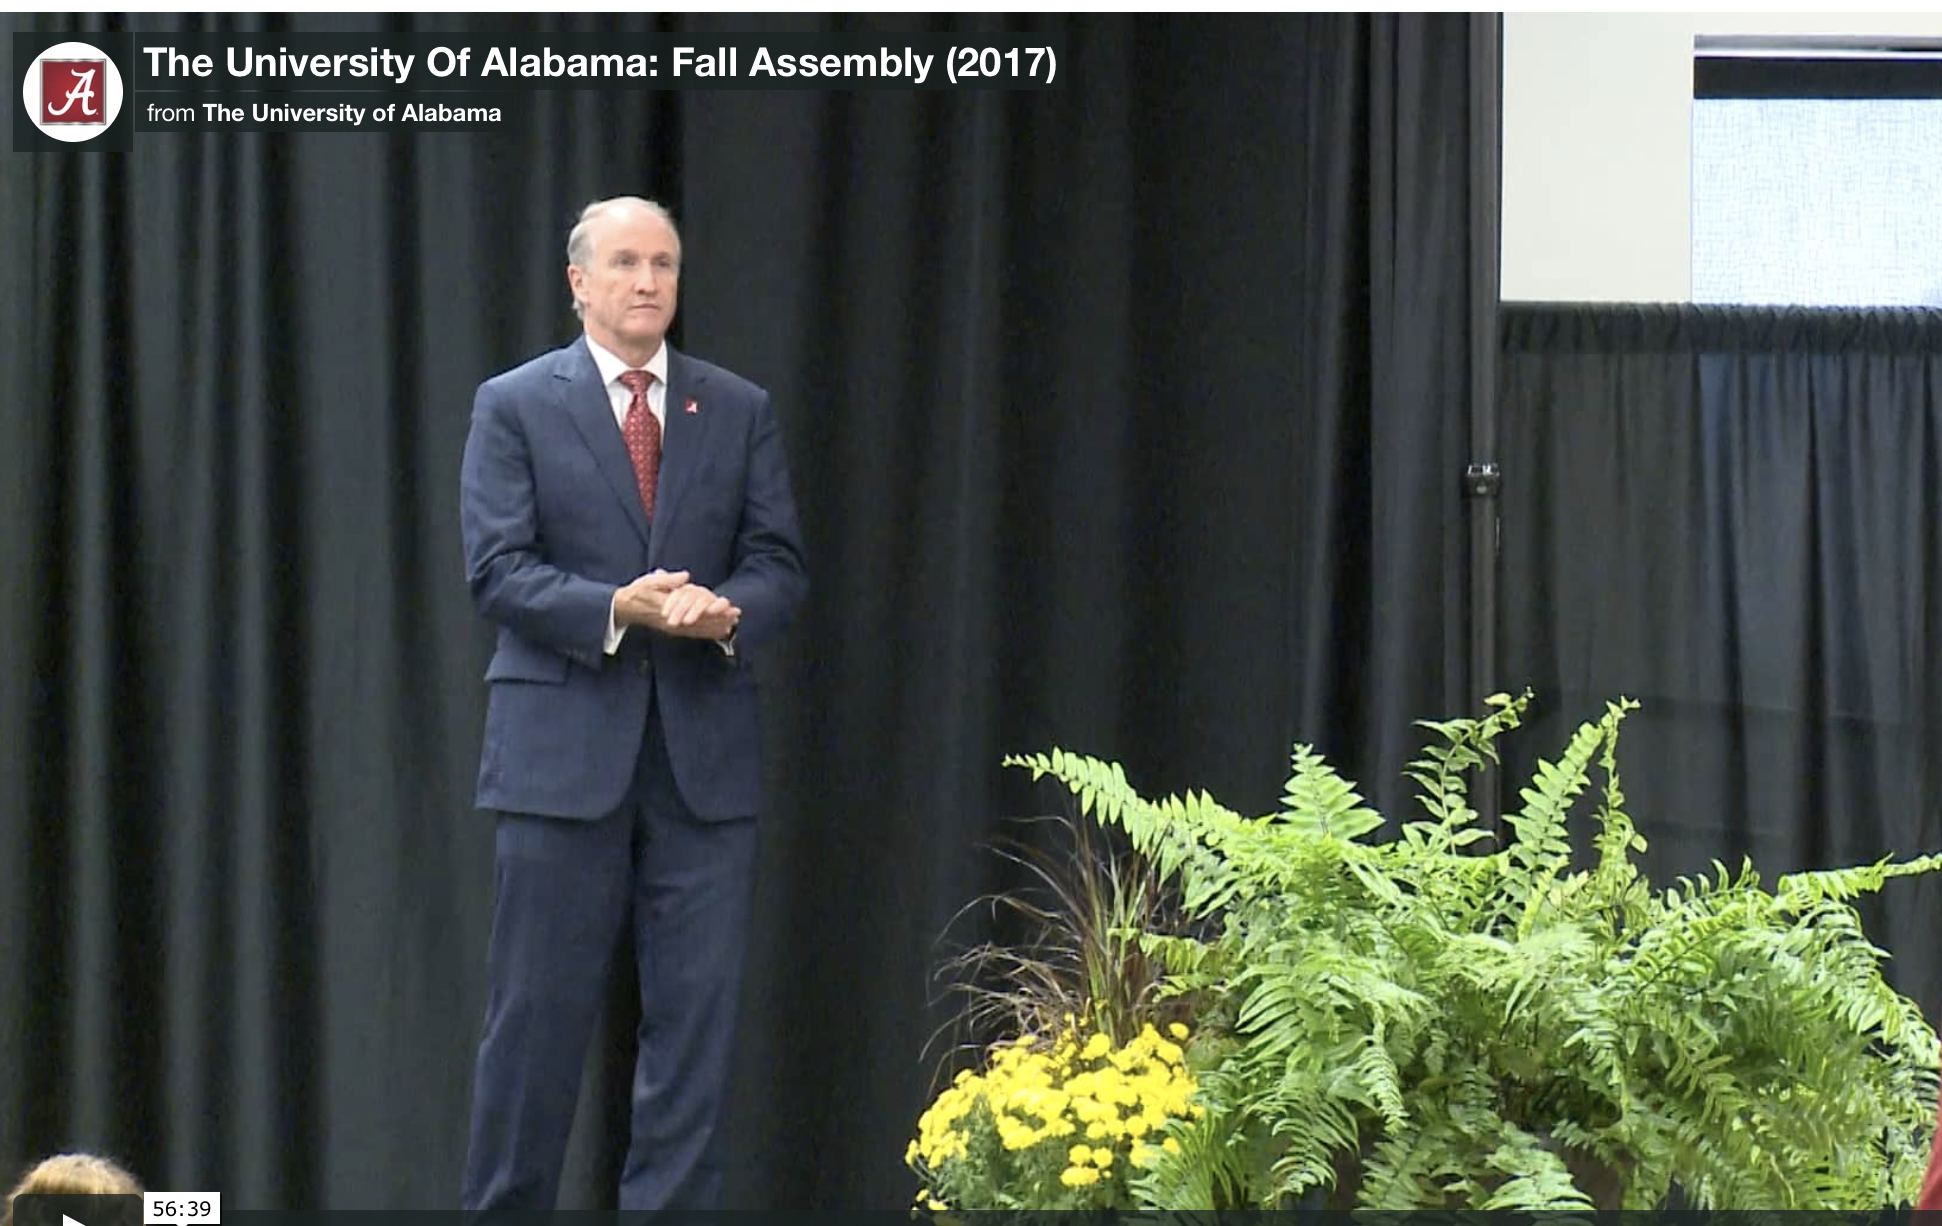 President Bell Highlights Role of Faculty and Staff in UA’s Success